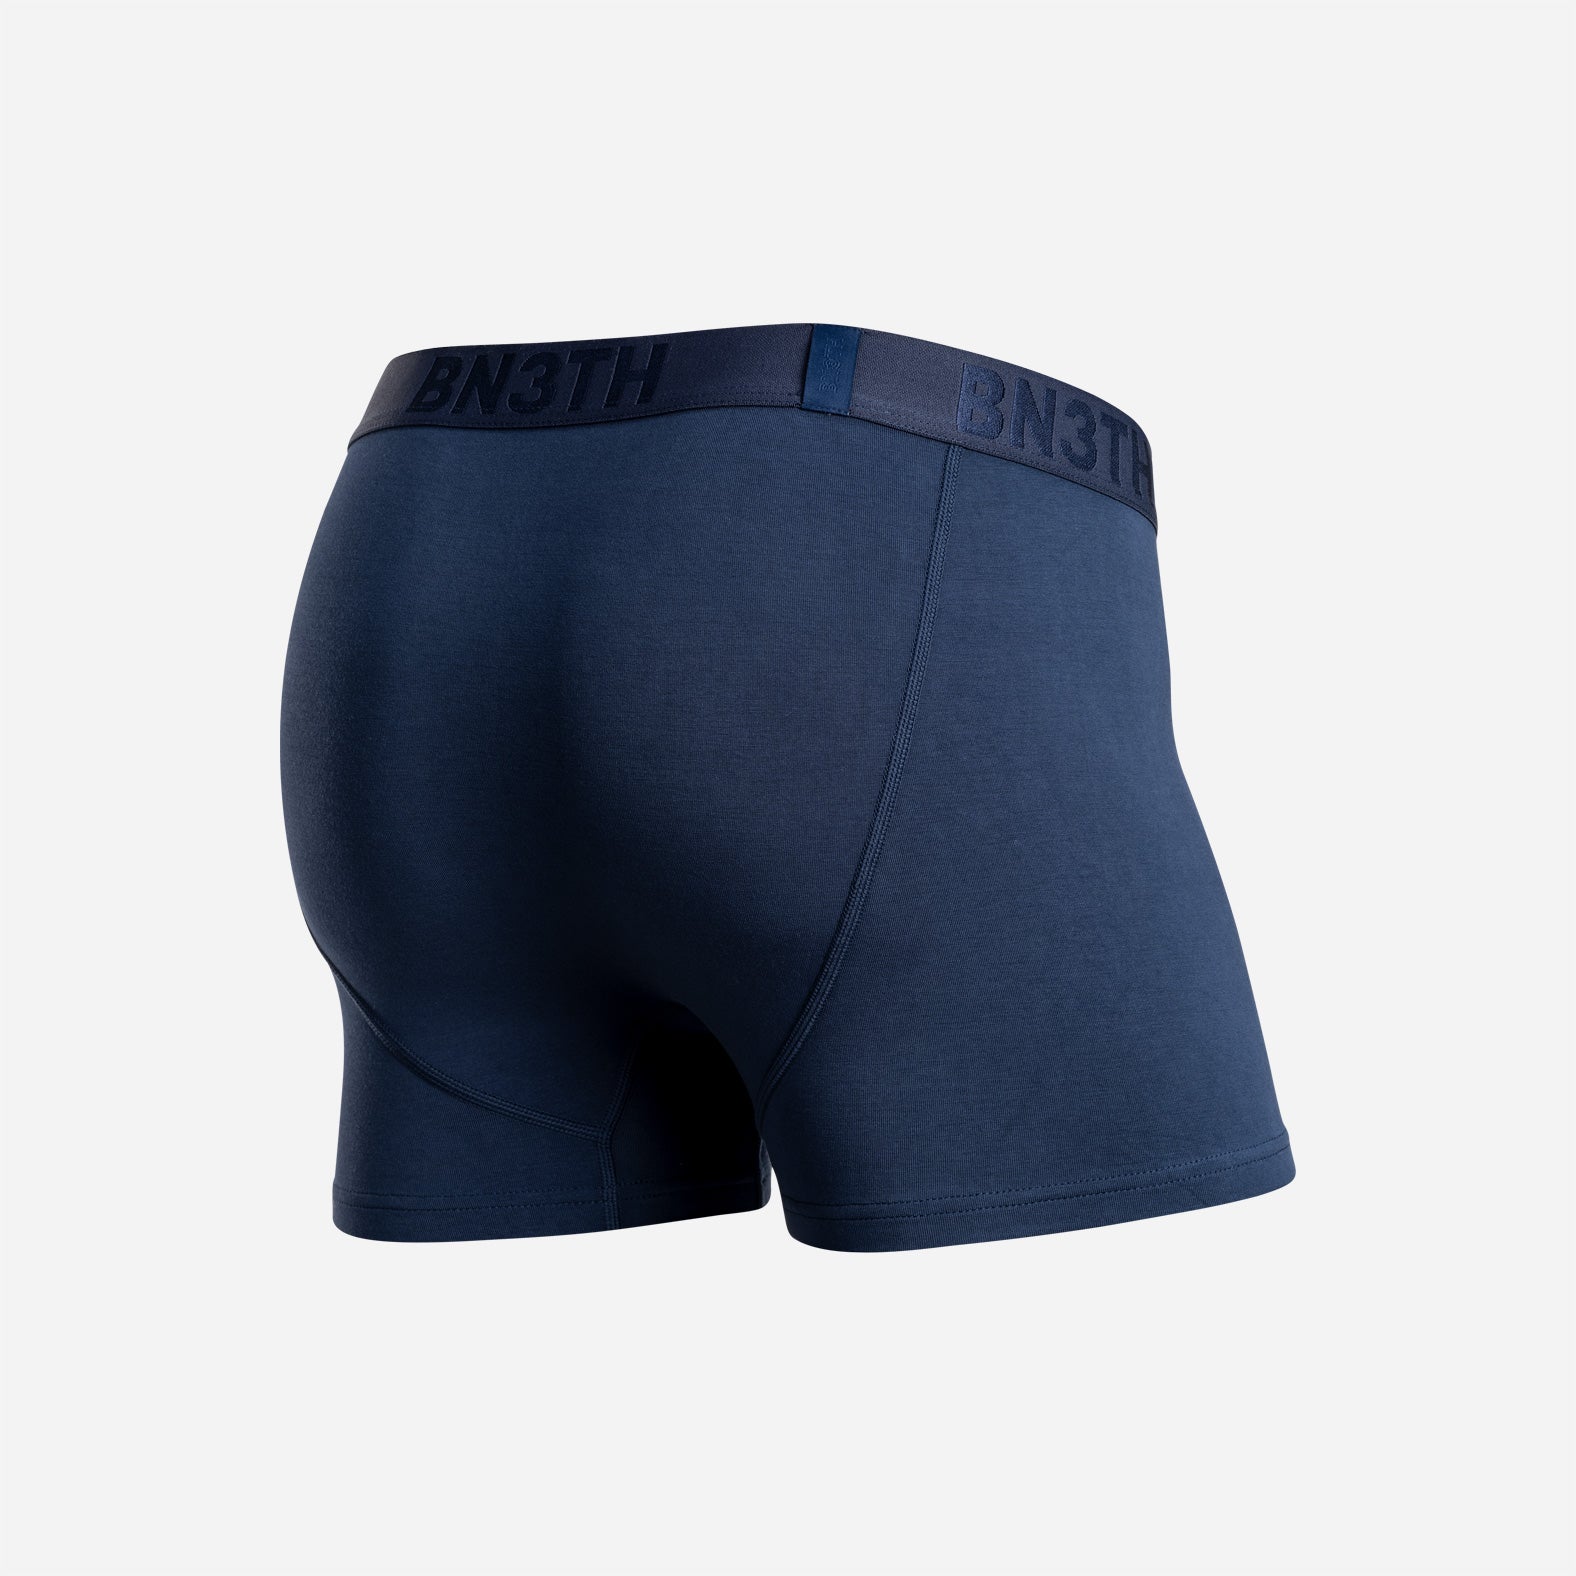 CLASSIC TRUNK WITH FLY: NAVY